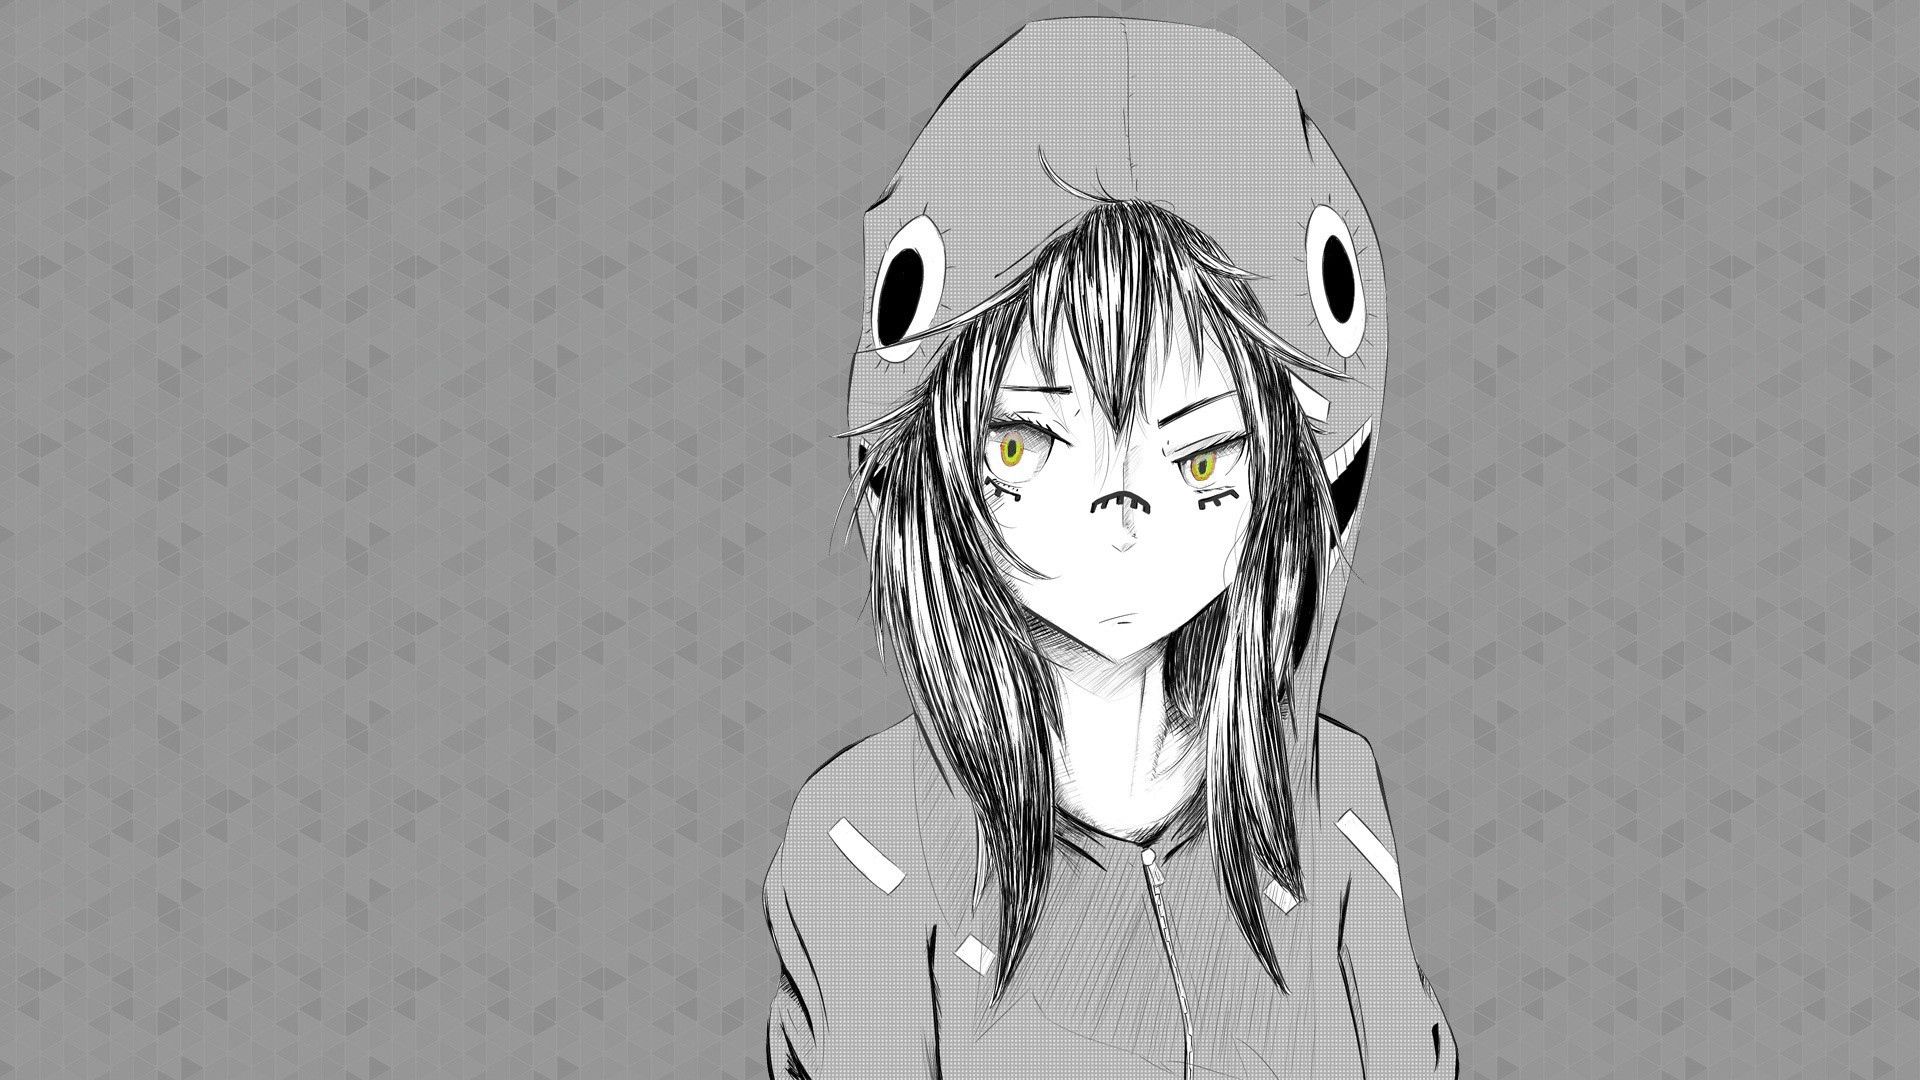 Download wallpaper 1920x1080 anime, girl, graphic, hat, black white HD background